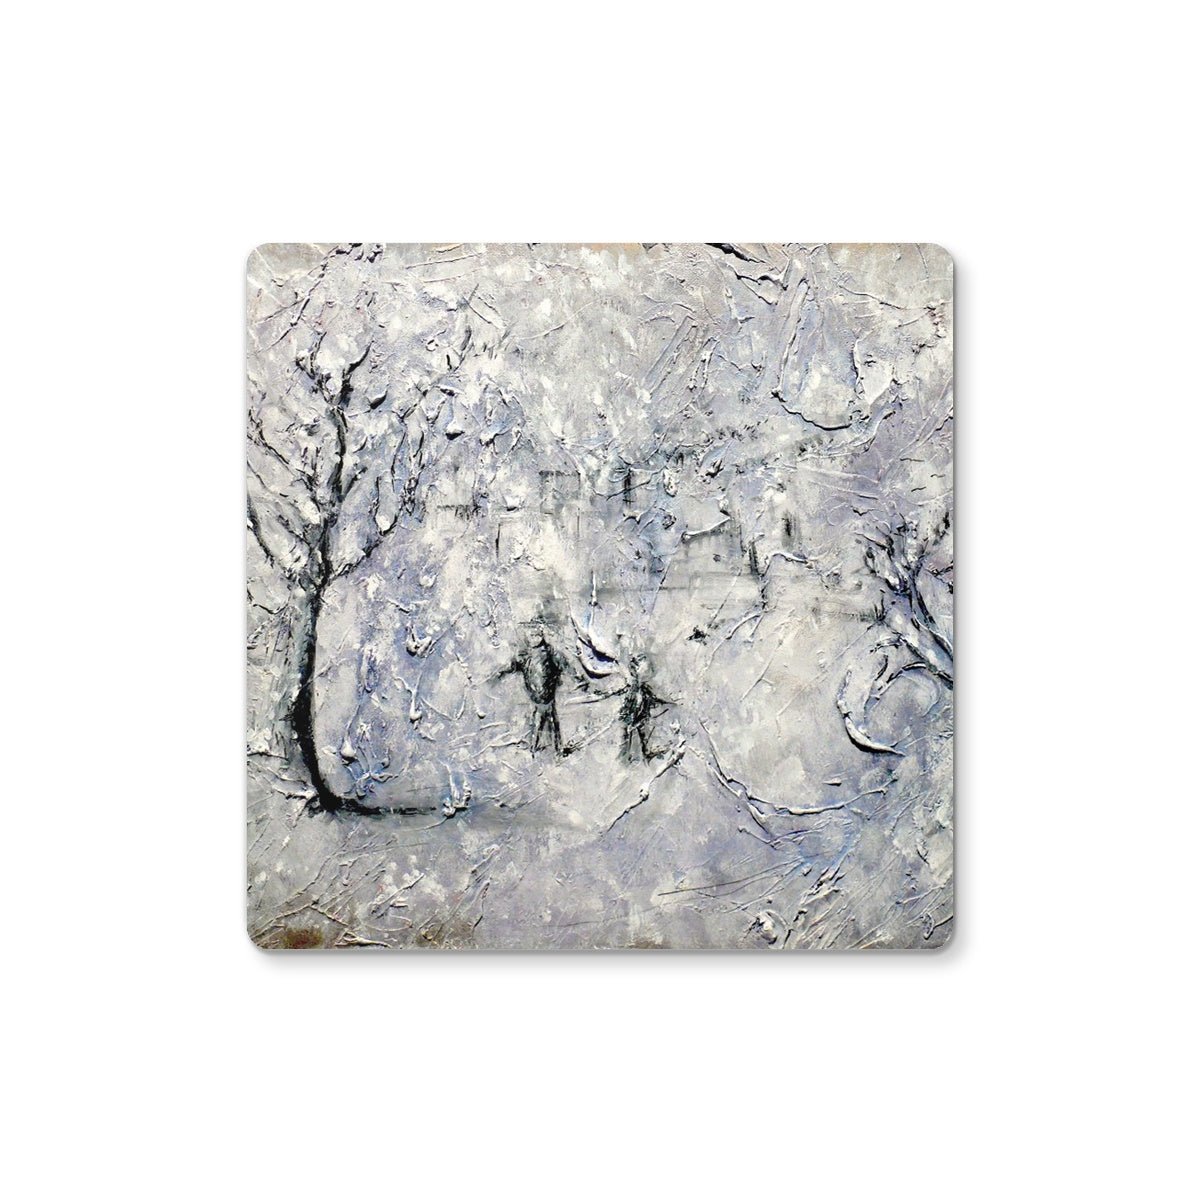 Father Daughter Snow Art Gifts Coaster-Coasters-Abstract & Impressionistic Art Gallery-Single Coaster-Paintings, Prints, Homeware, Art Gifts From Scotland By Scottish Artist Kevin Hunter